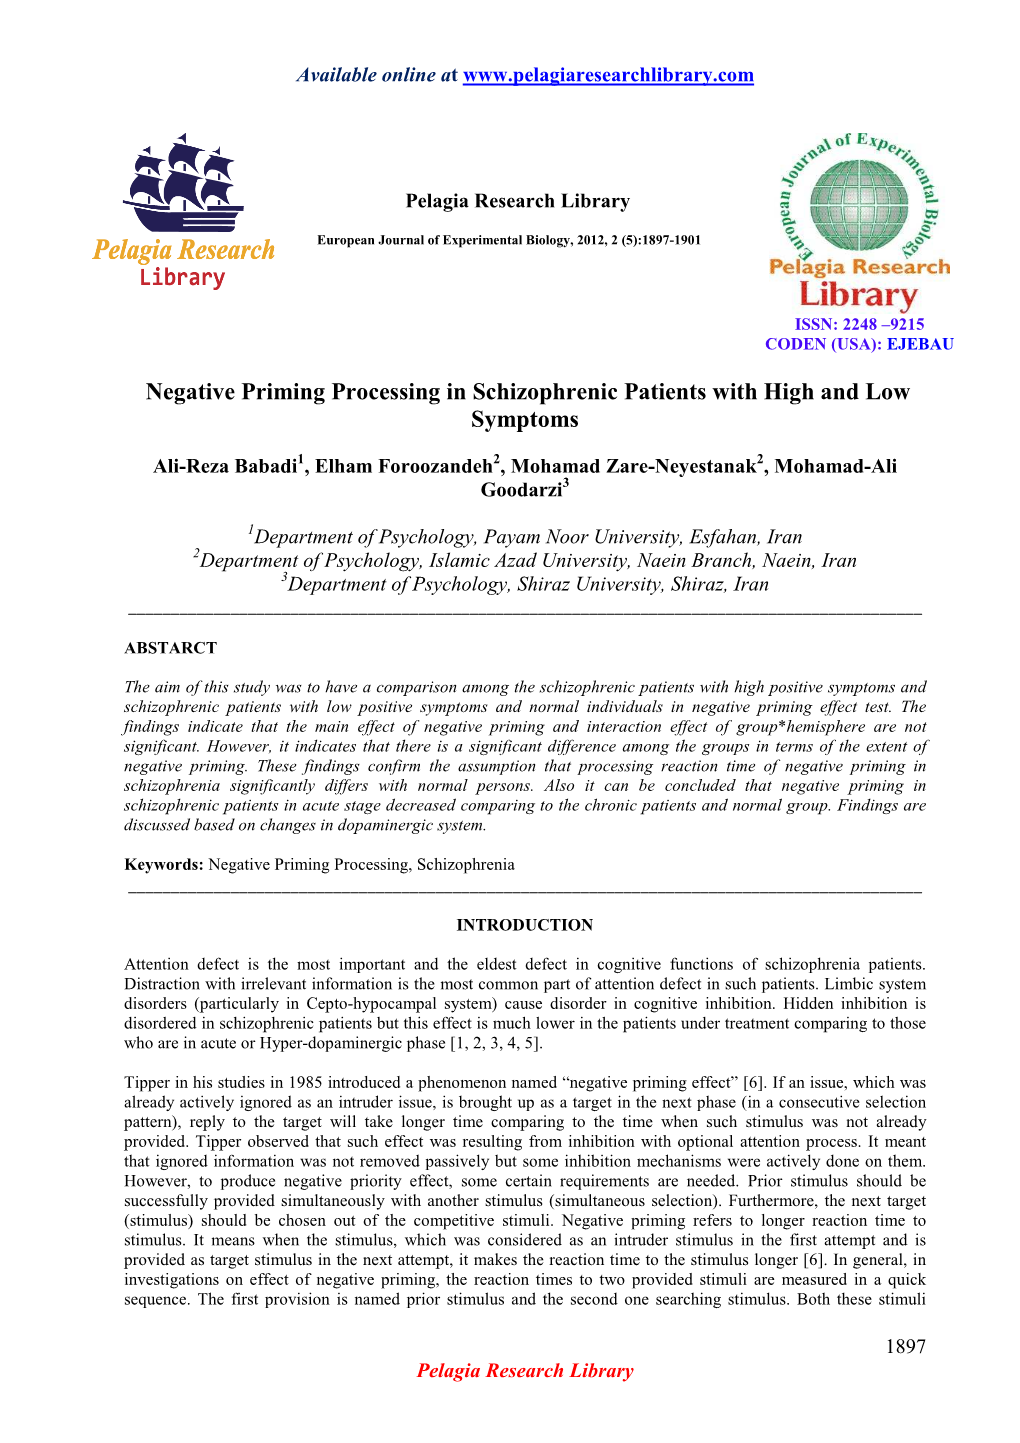 Negative Priming Processing in Schizophrenic Patients with High and Low Symptoms